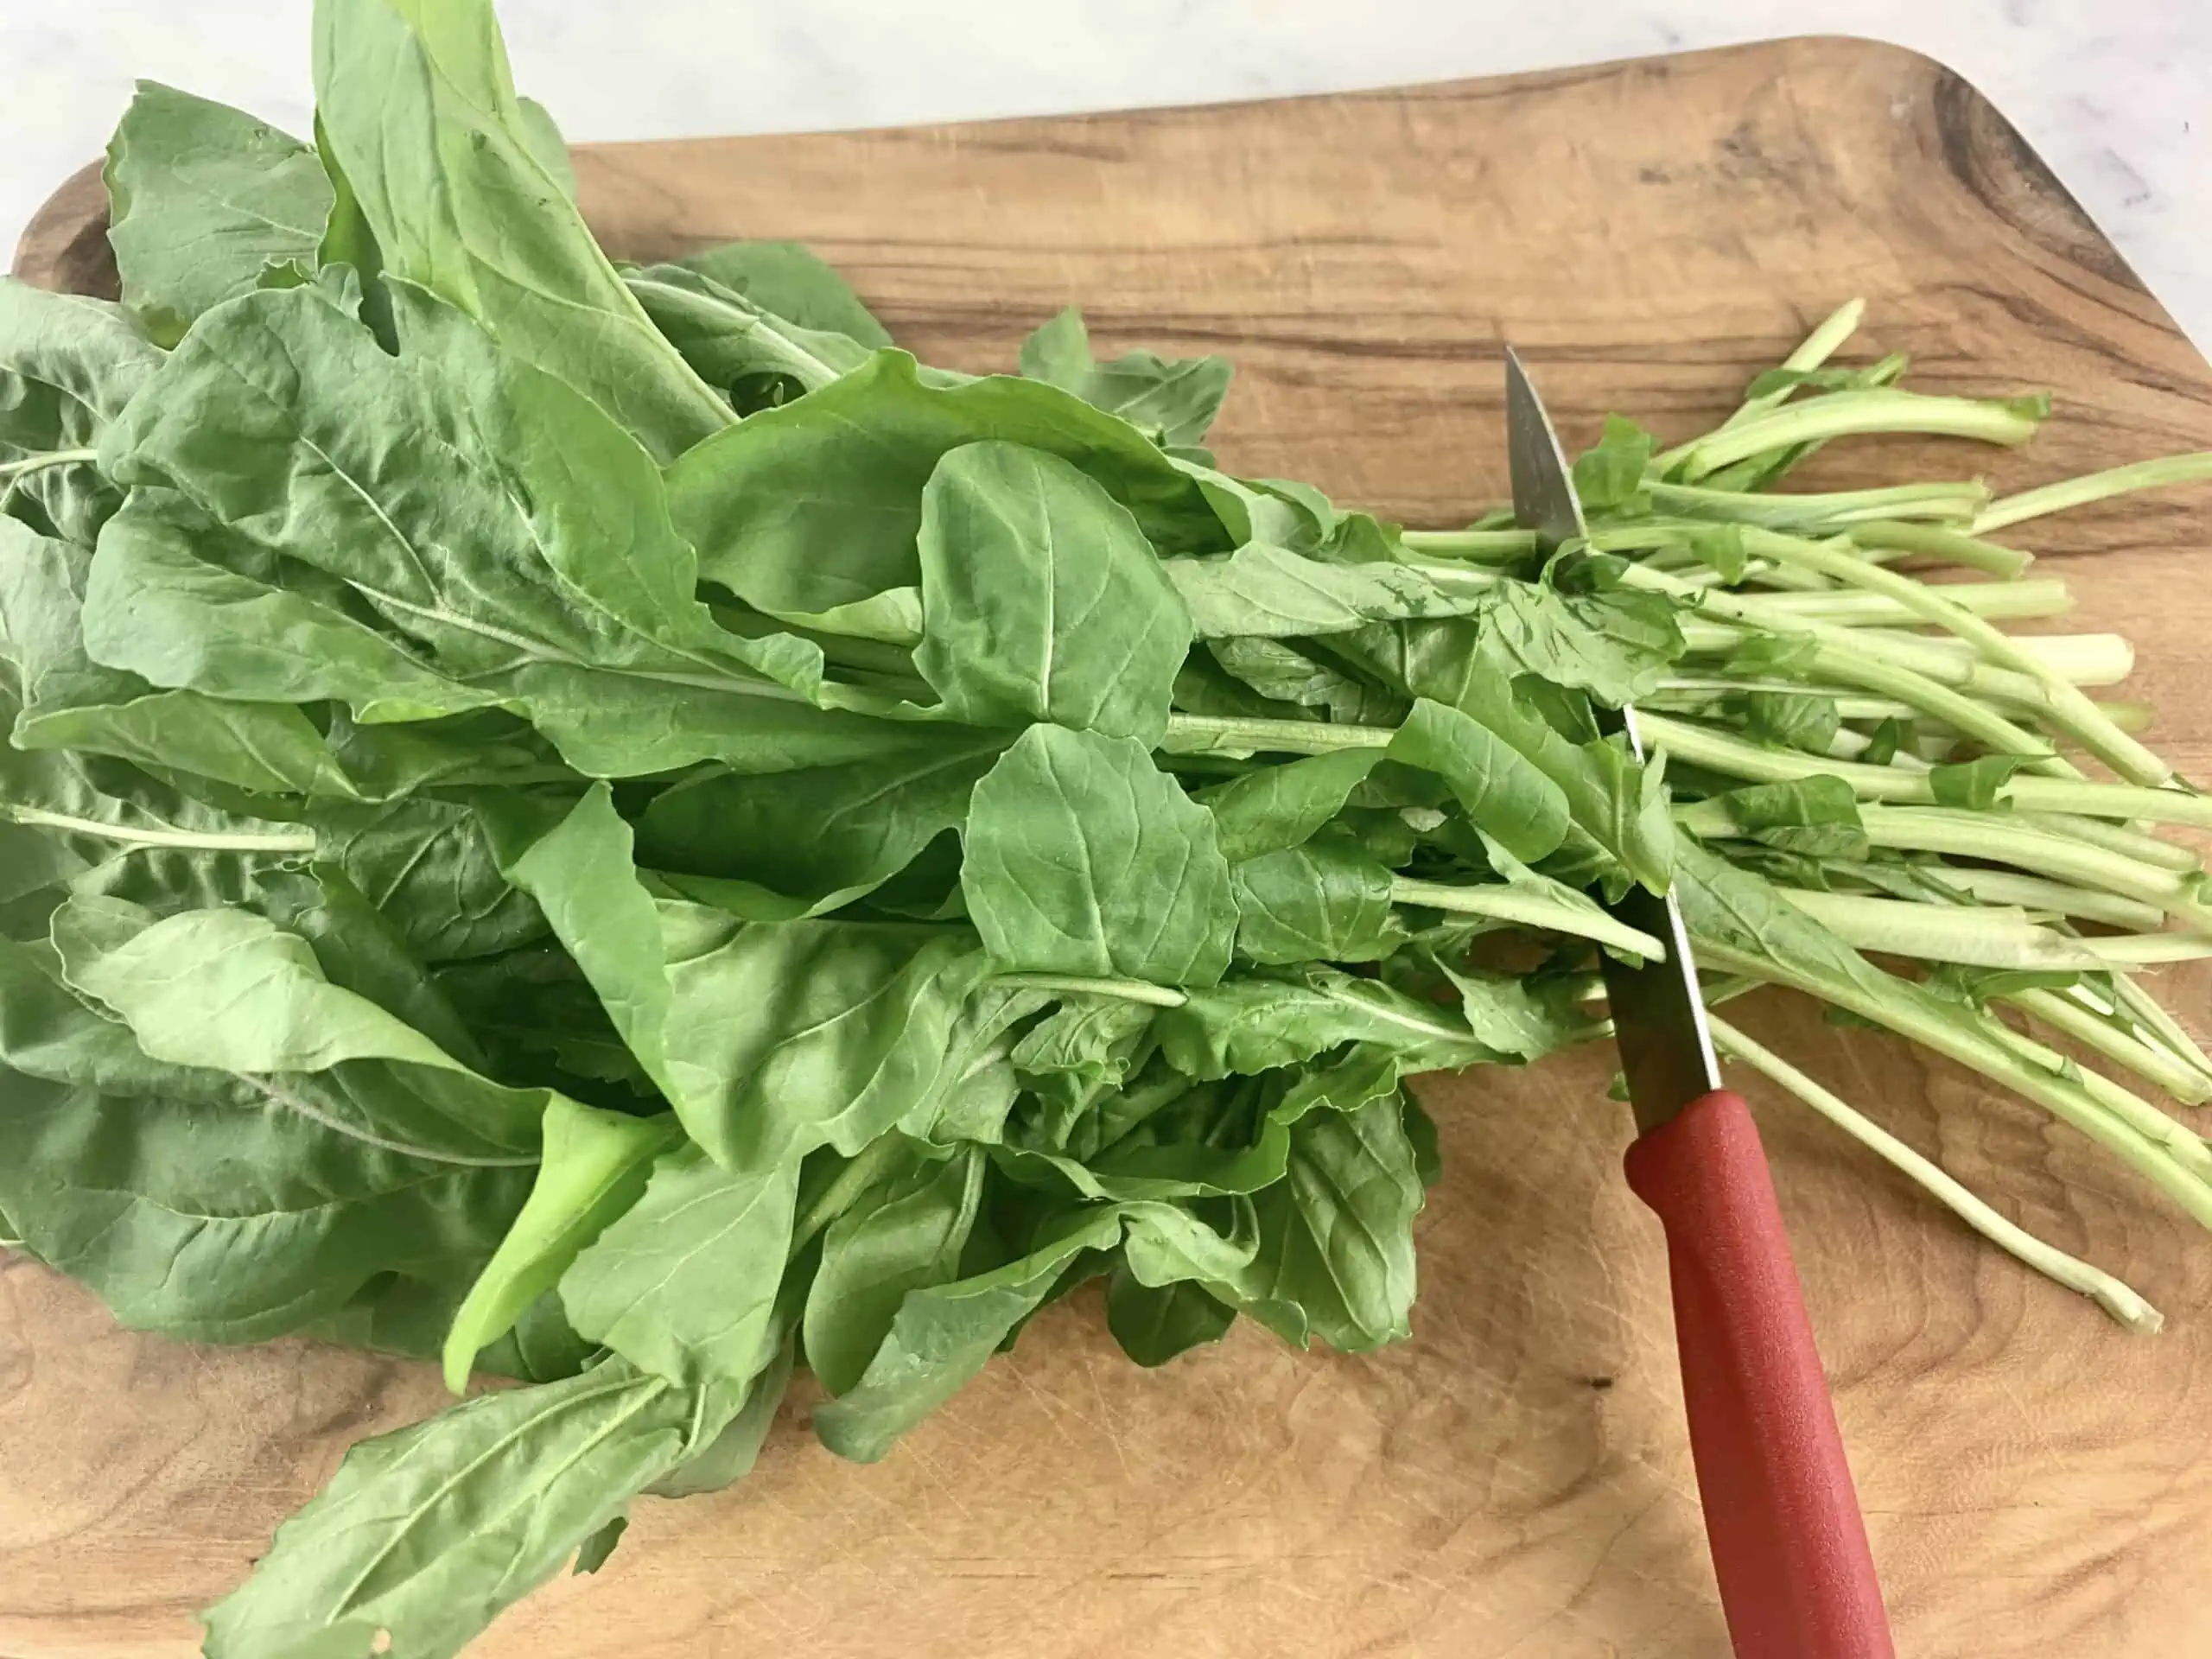 A knife trimming a bunch of rocket on.a wooden board.